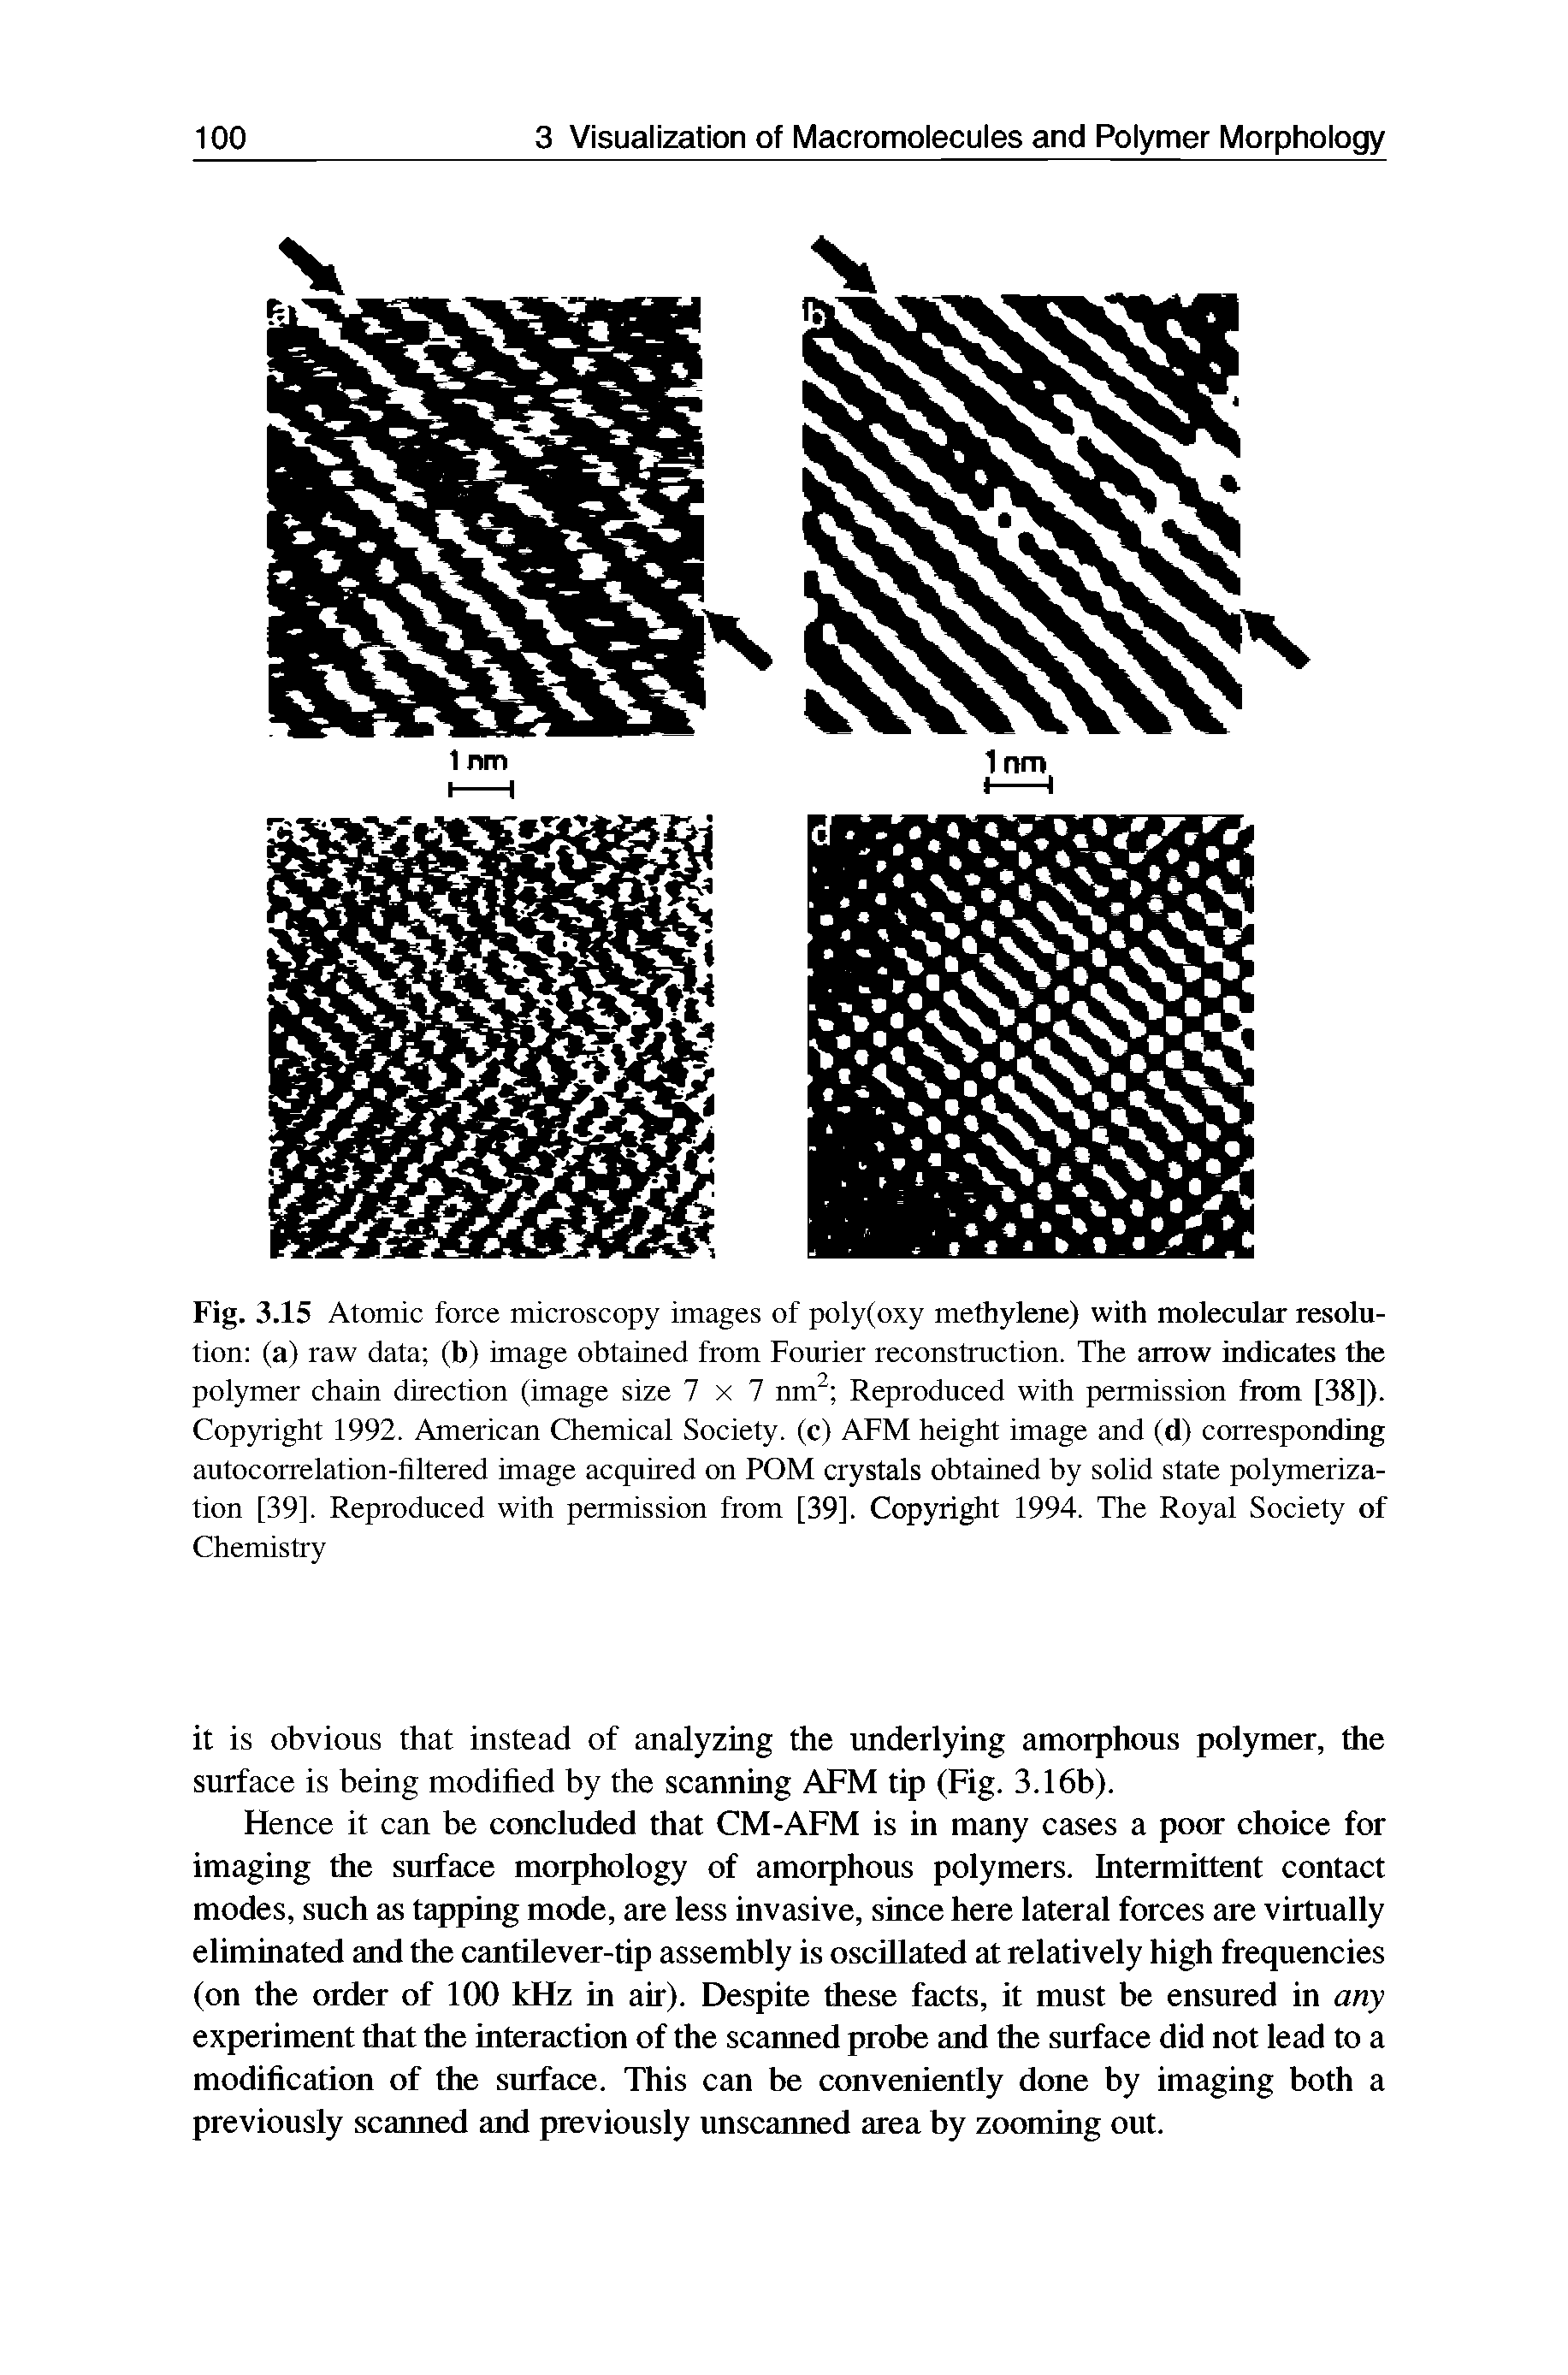 Fig. 3.15 Atomic force microscopy images of poly(oxy methylene) with molecular resolution (a) raw data (b) image obtained from Fourier reconstruction. The arrow indicates the polymer chain direction (image size 7x7 nm2 Reproduced with permission from [38]). Copyright 1992. American Chemical Society, (c) AFM height image and (d) corresponding autocorrelation-filtered image acquired on POM crystals obtained by solid state polymerization [39]. Reproduced with permission from [39]. Copyright 1994. The Royal Society of Chemistry...